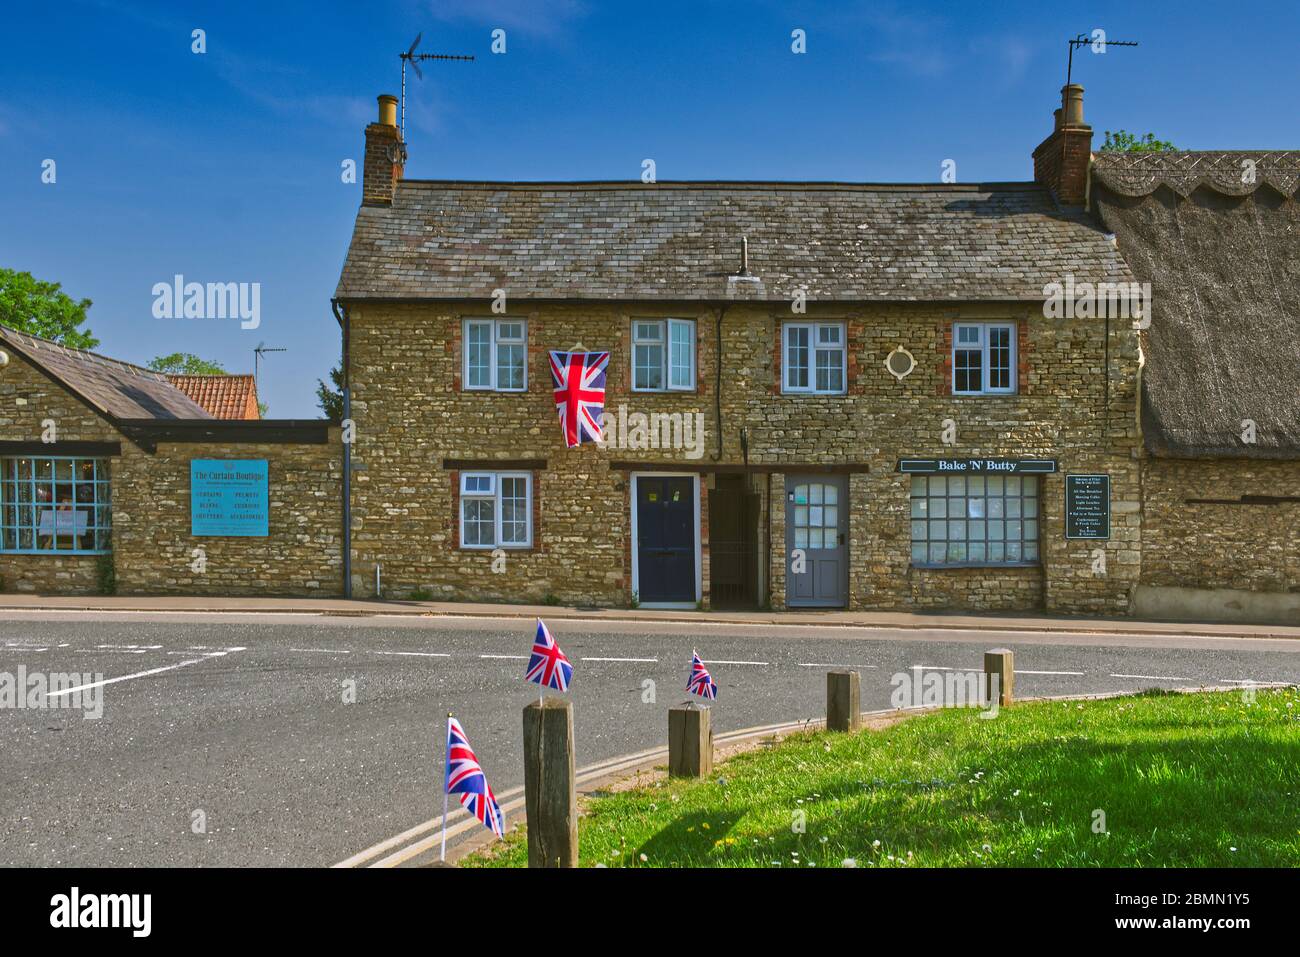 8 May 2020. Cottage and village green in Sharnbrook, Bedfordshire, UK decorated with union jack flags for VE Day 75th anniversary Stock Photo